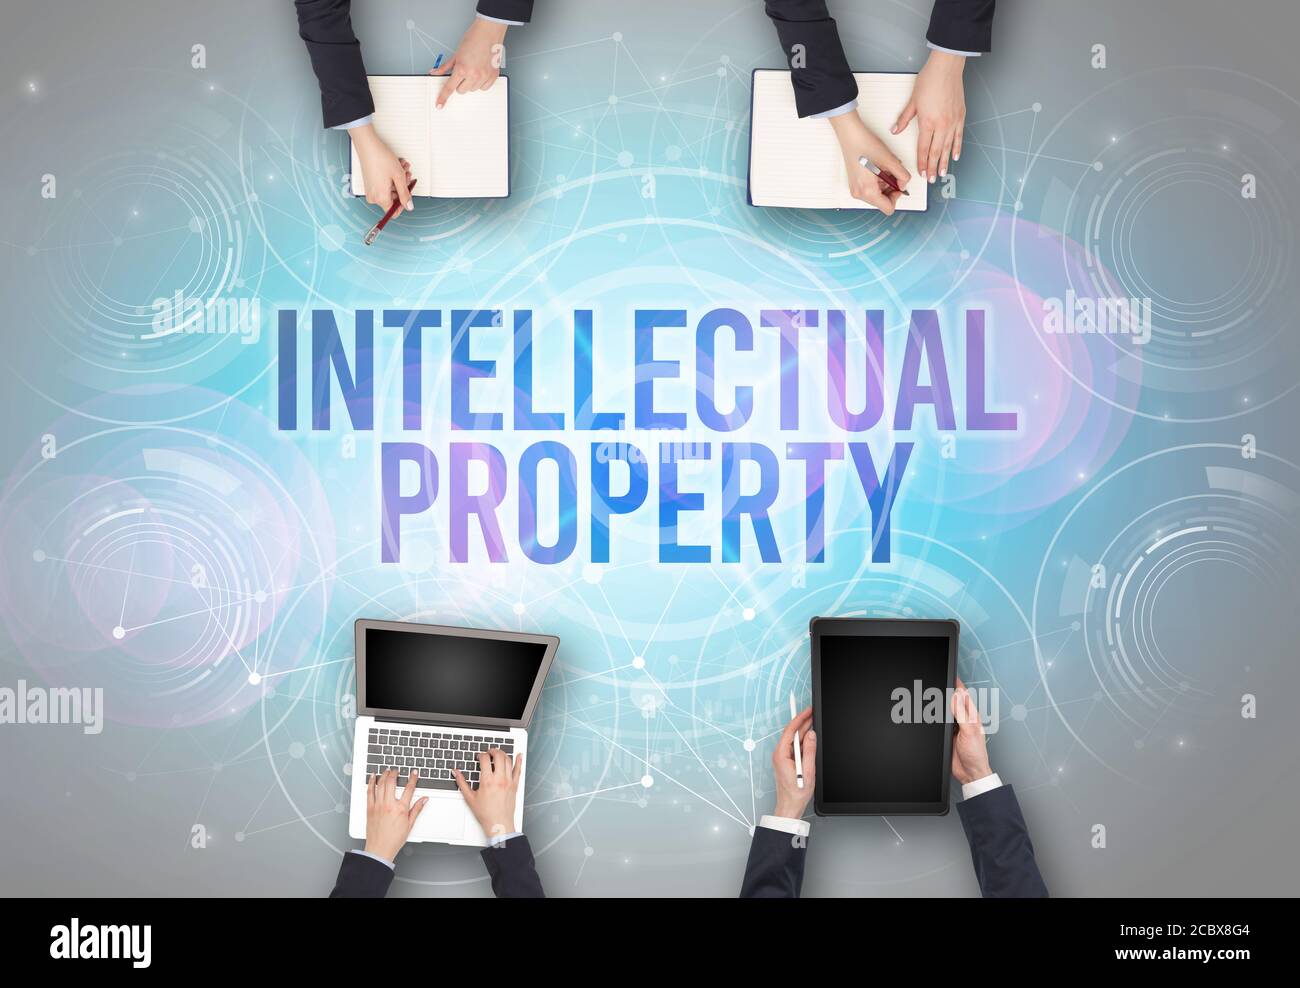 Group of people in front of a laptop with INTELLECTUAL PROPERTY insciption, web security concept Stock Photo